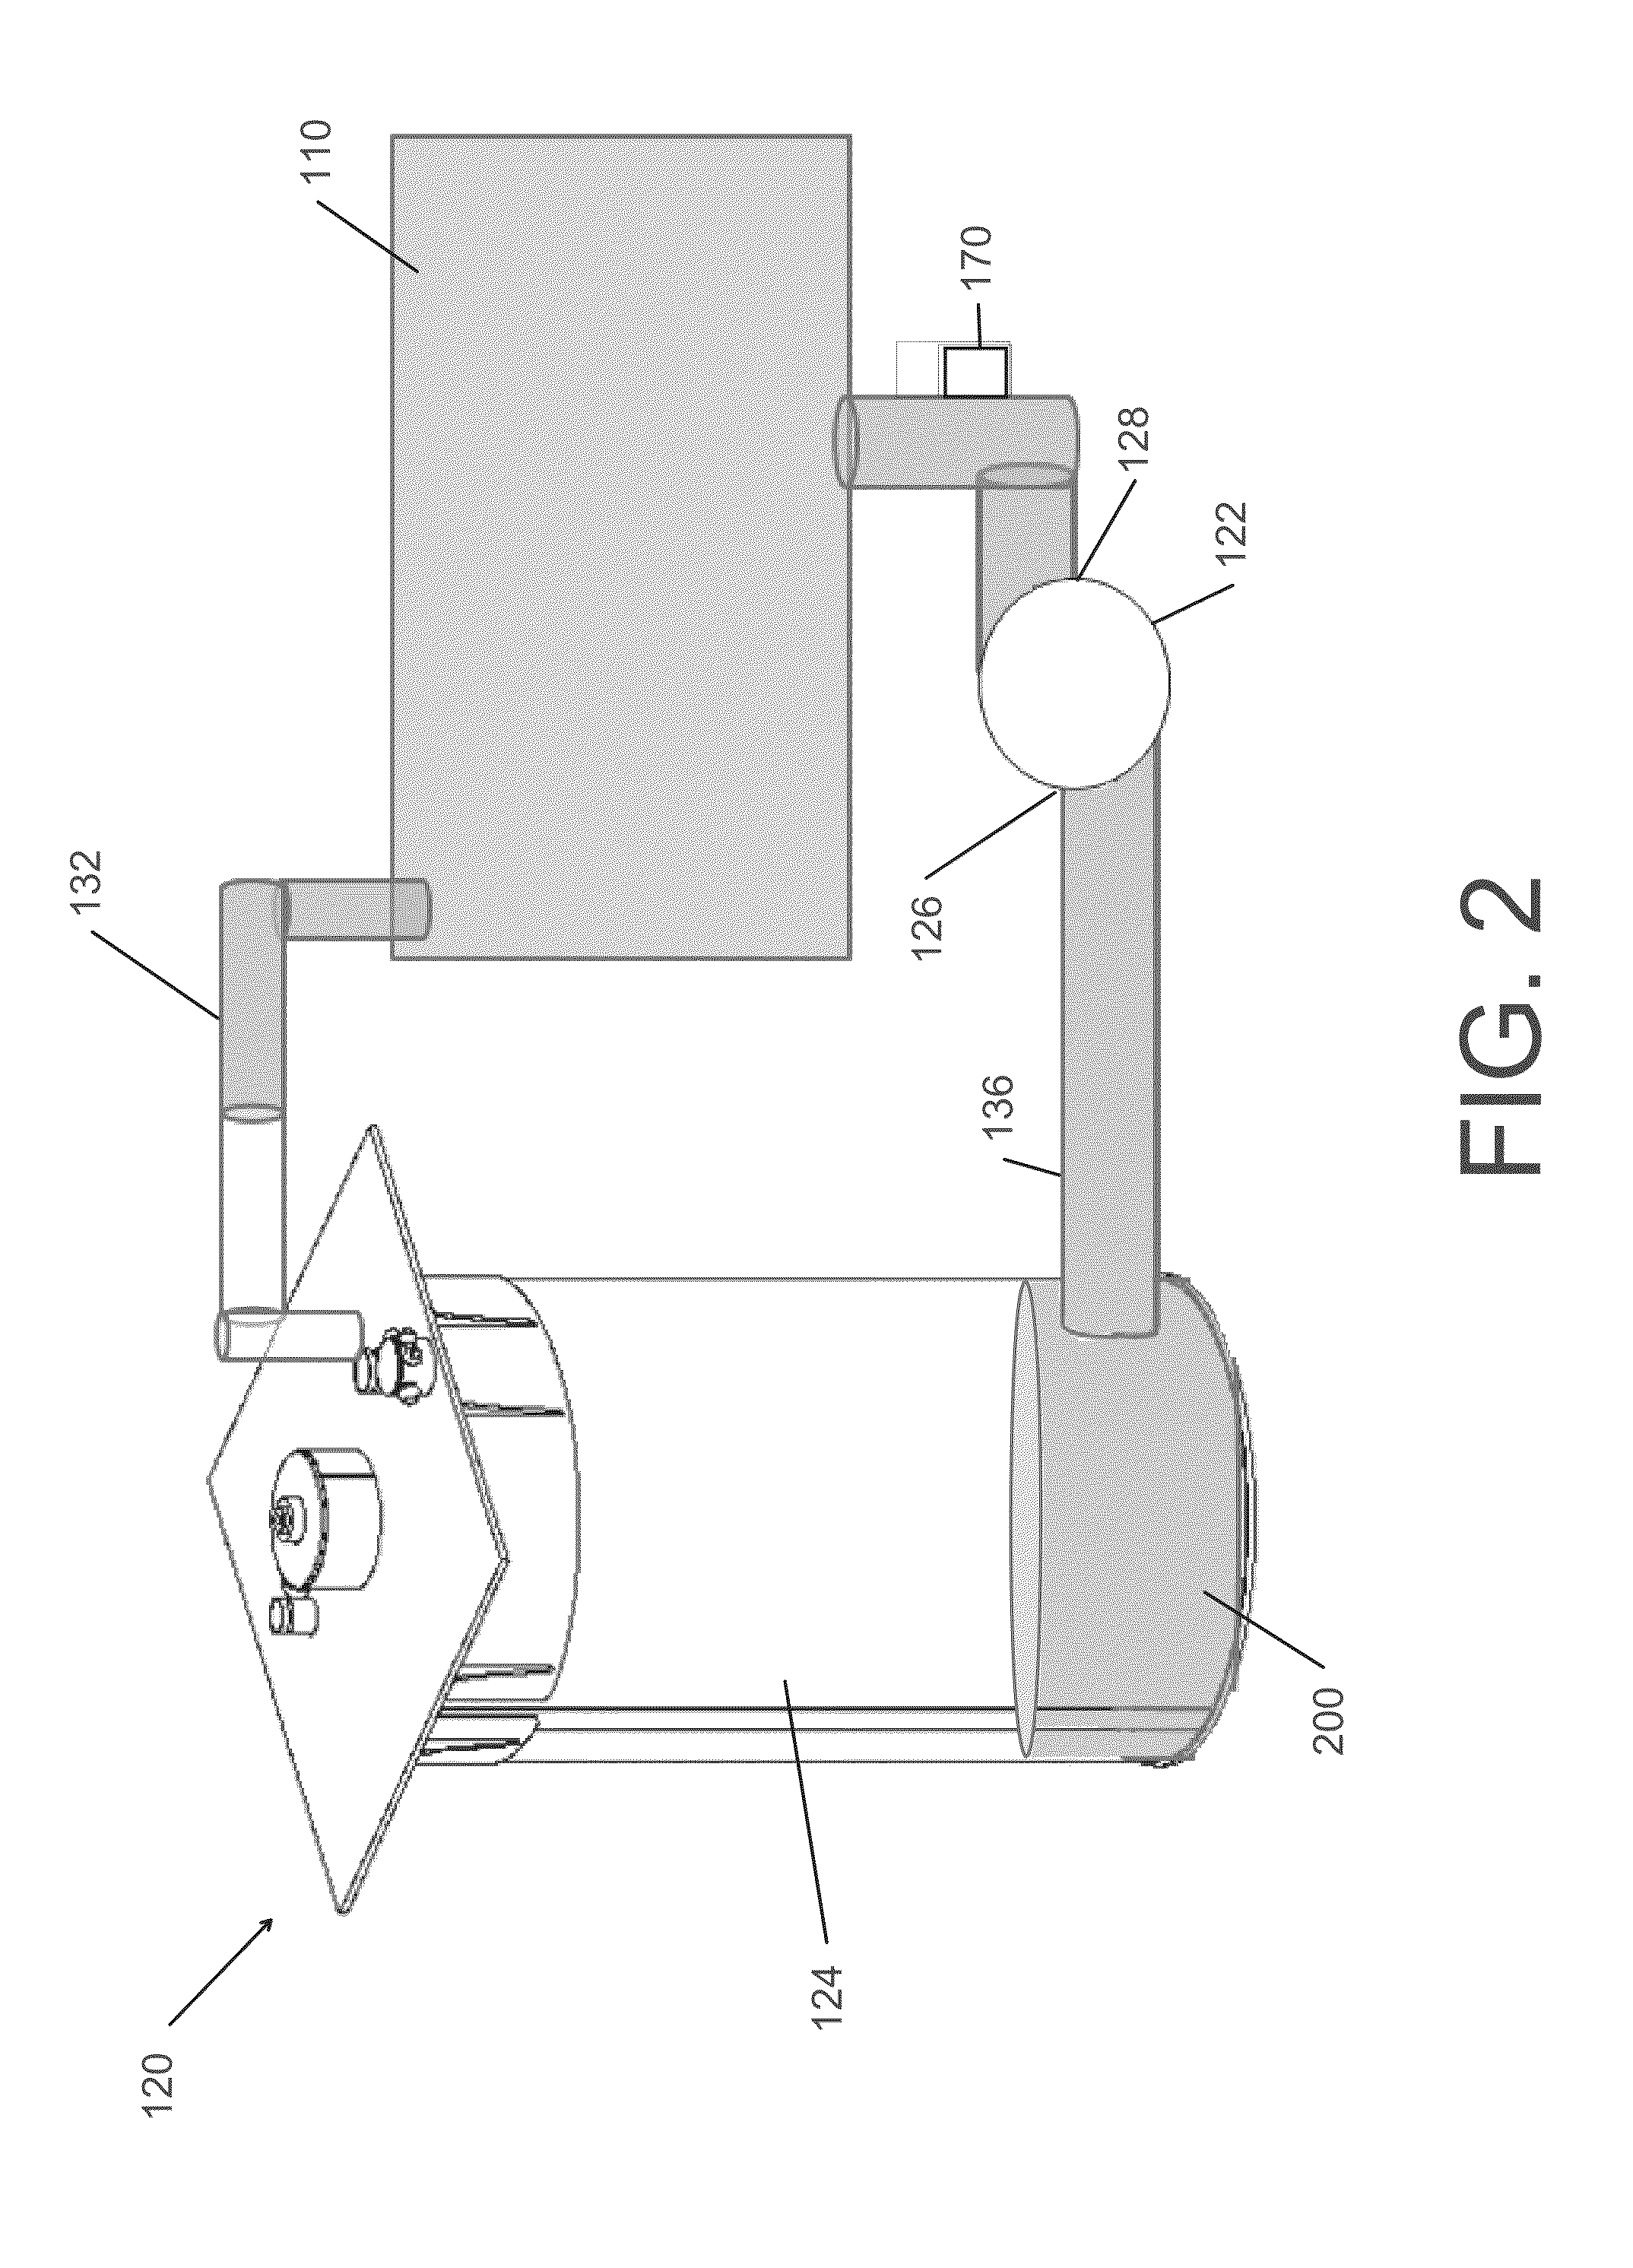 Systems and methods for diagnosing an engine